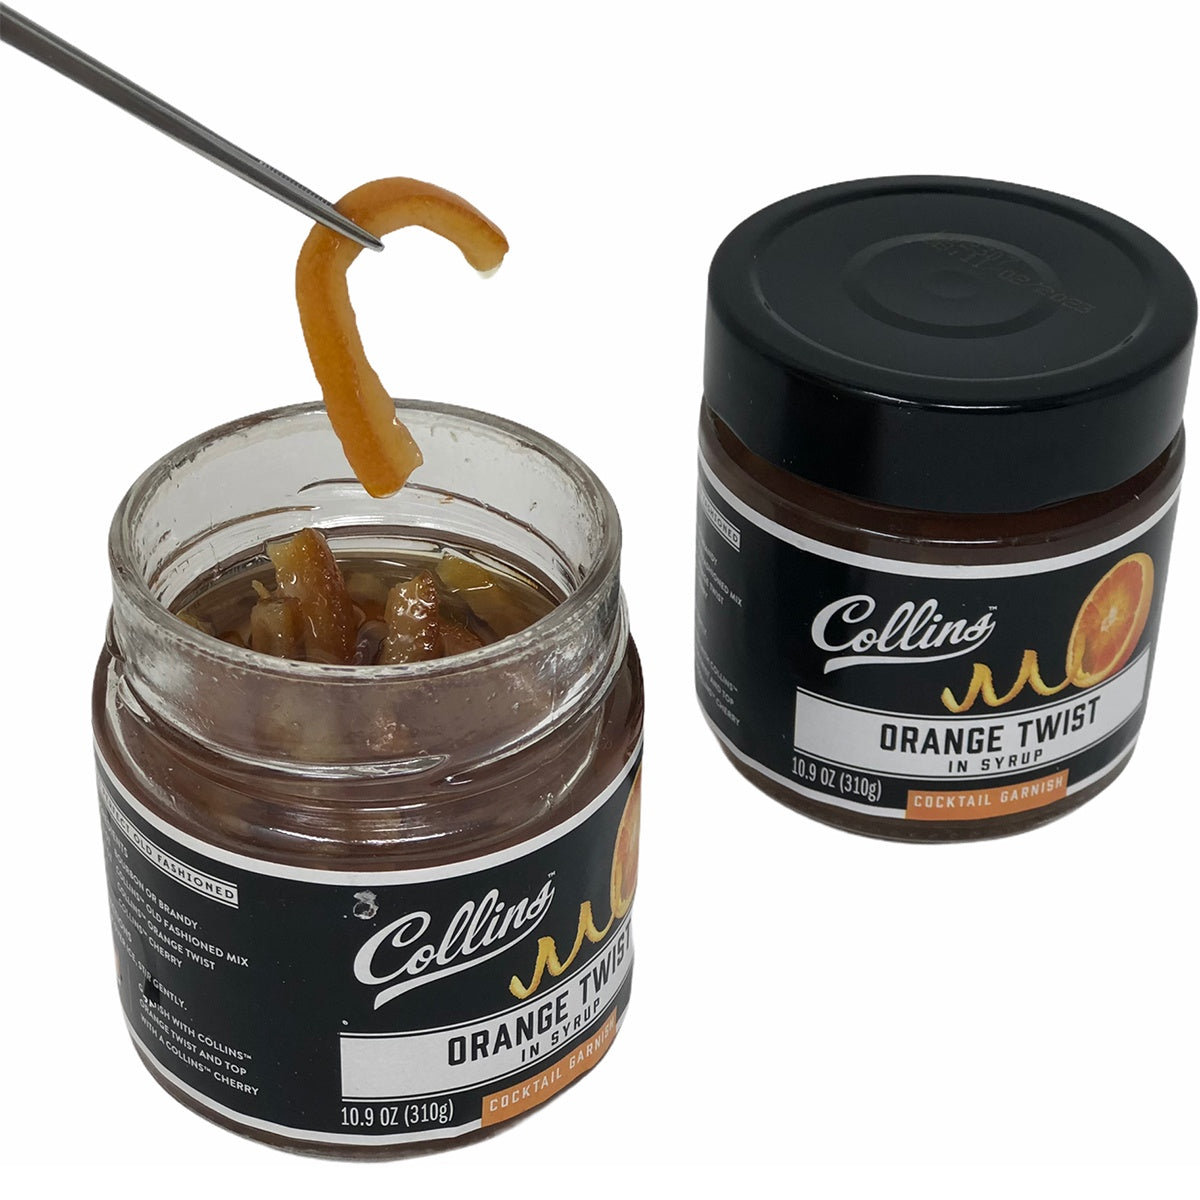 Collins Orange Twist in Syrup (Pack of 2) bundled with a Complimentary Plating/Garnishing Tweezer